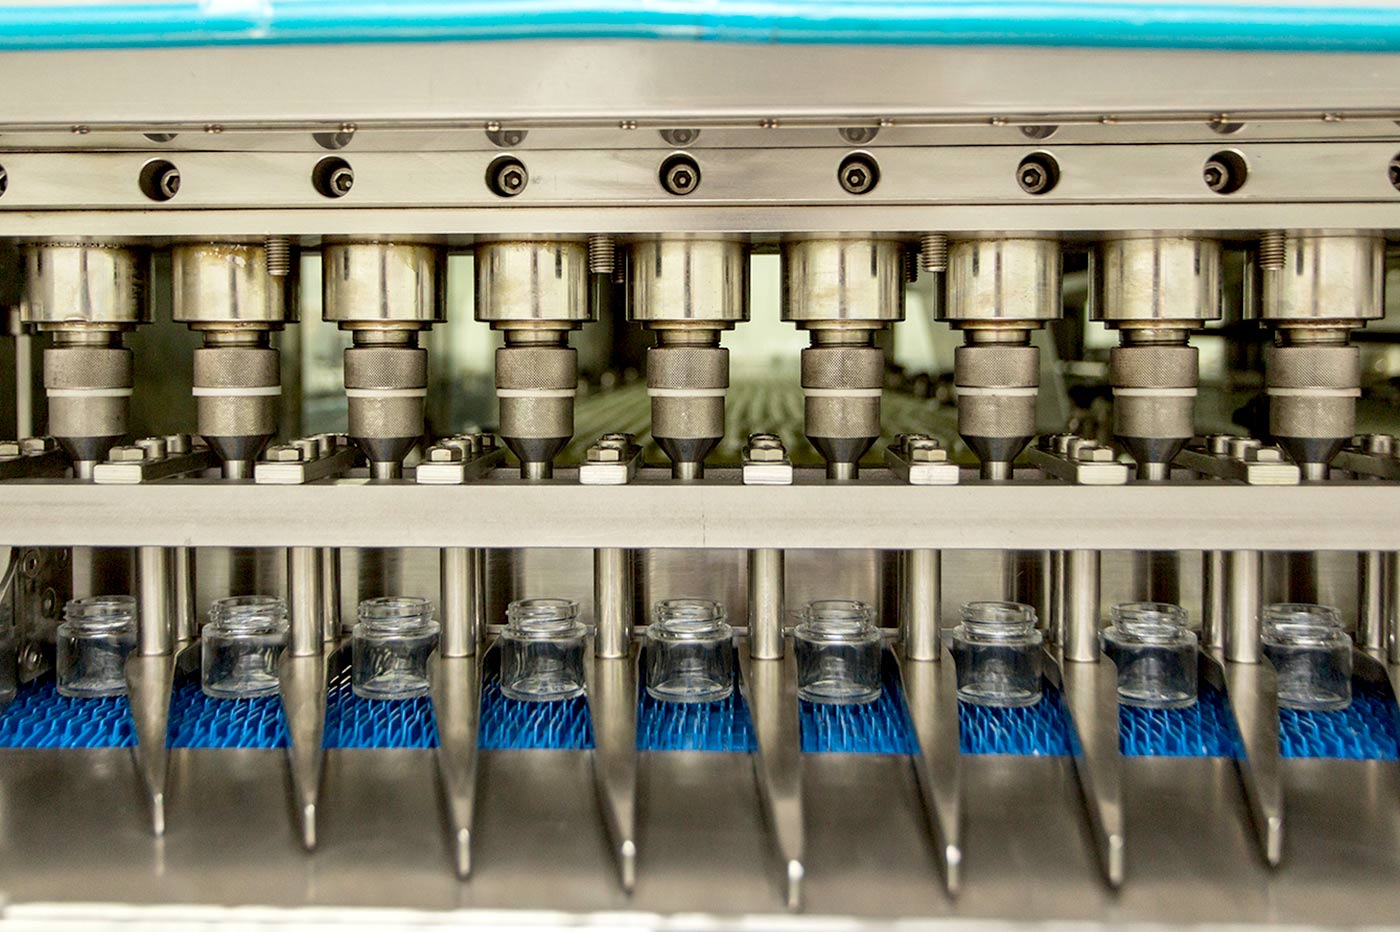 Solvents are injected into glass bottles through a filling machine